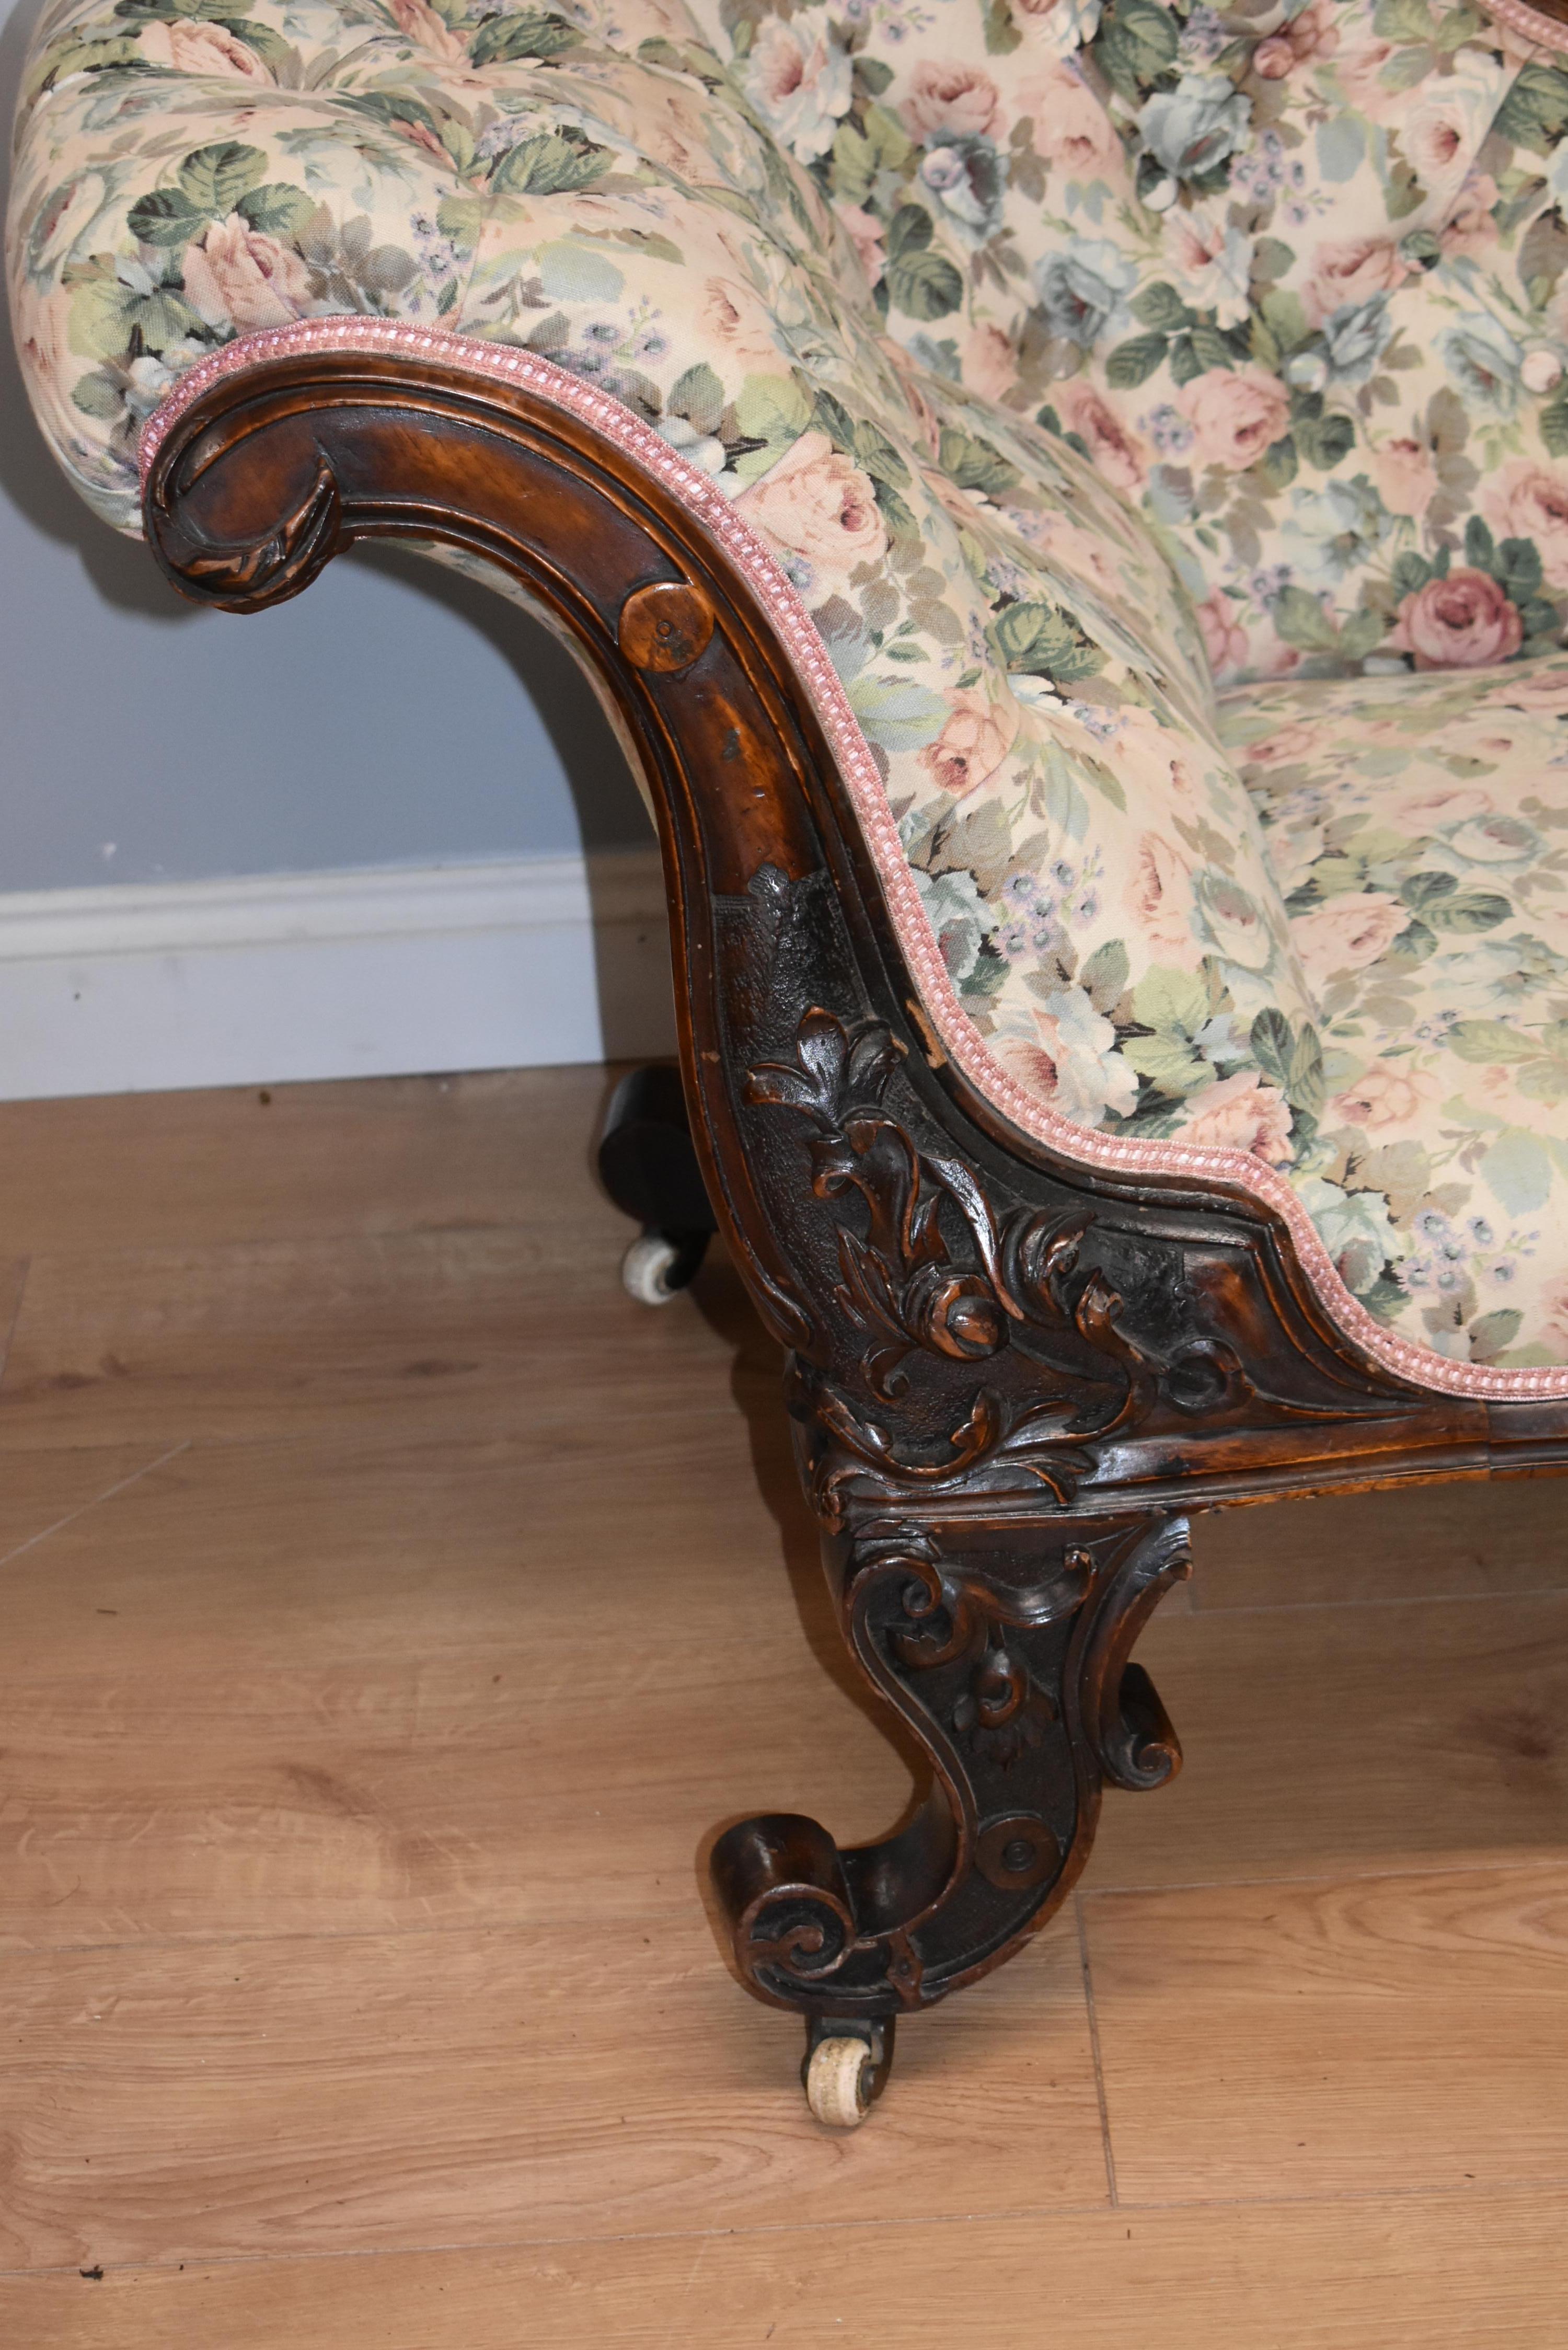 For sale is a good quality Victorian walnut carved chaise lounge having buttoned back upholstery covered in floral Sanderson material. The frame is structurally sound. 

Requires re-upholstery.